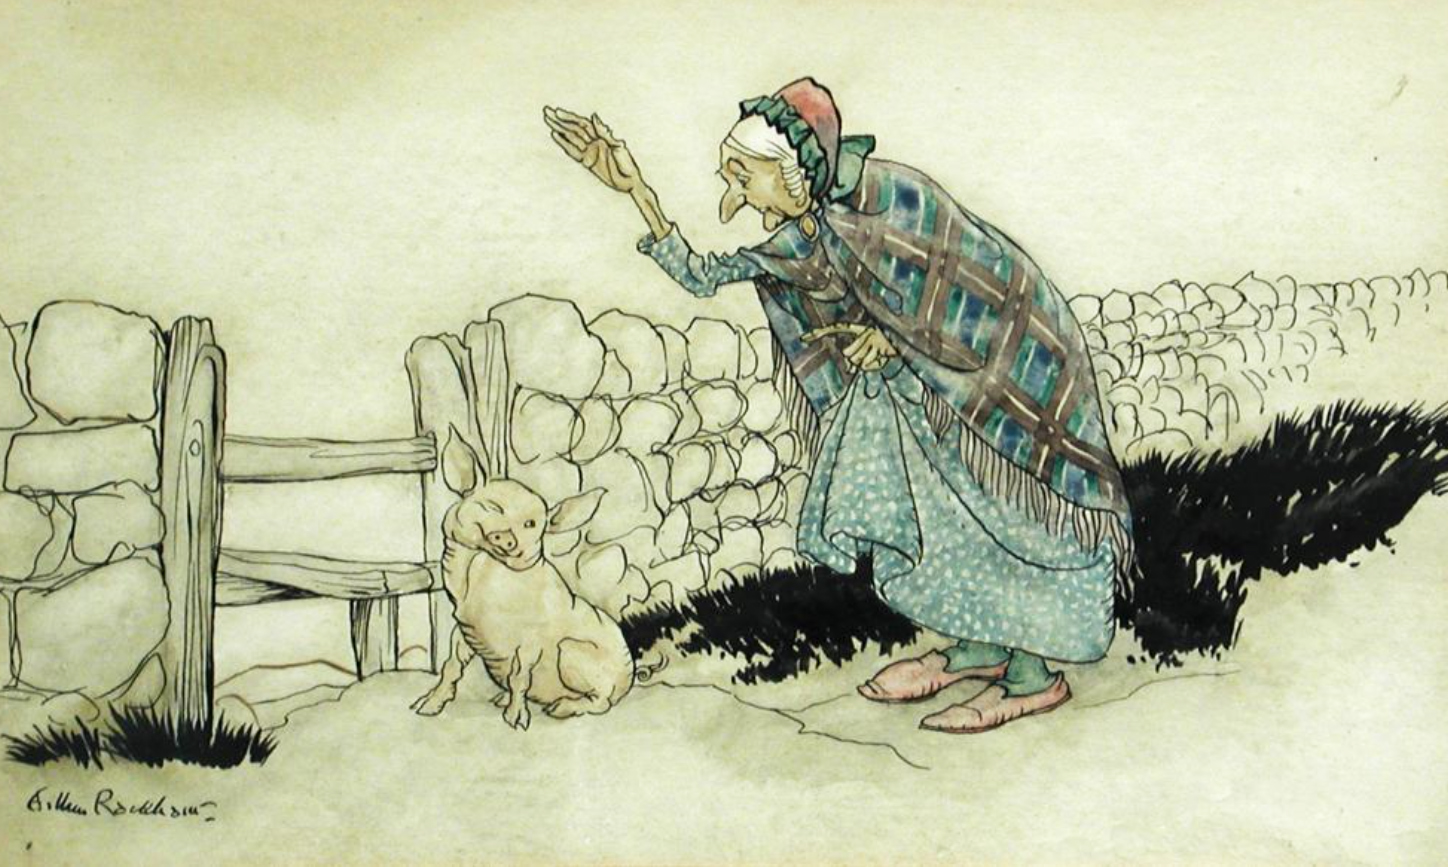 Original Watercolour Drawing of 'The Old Woman and the Pig'